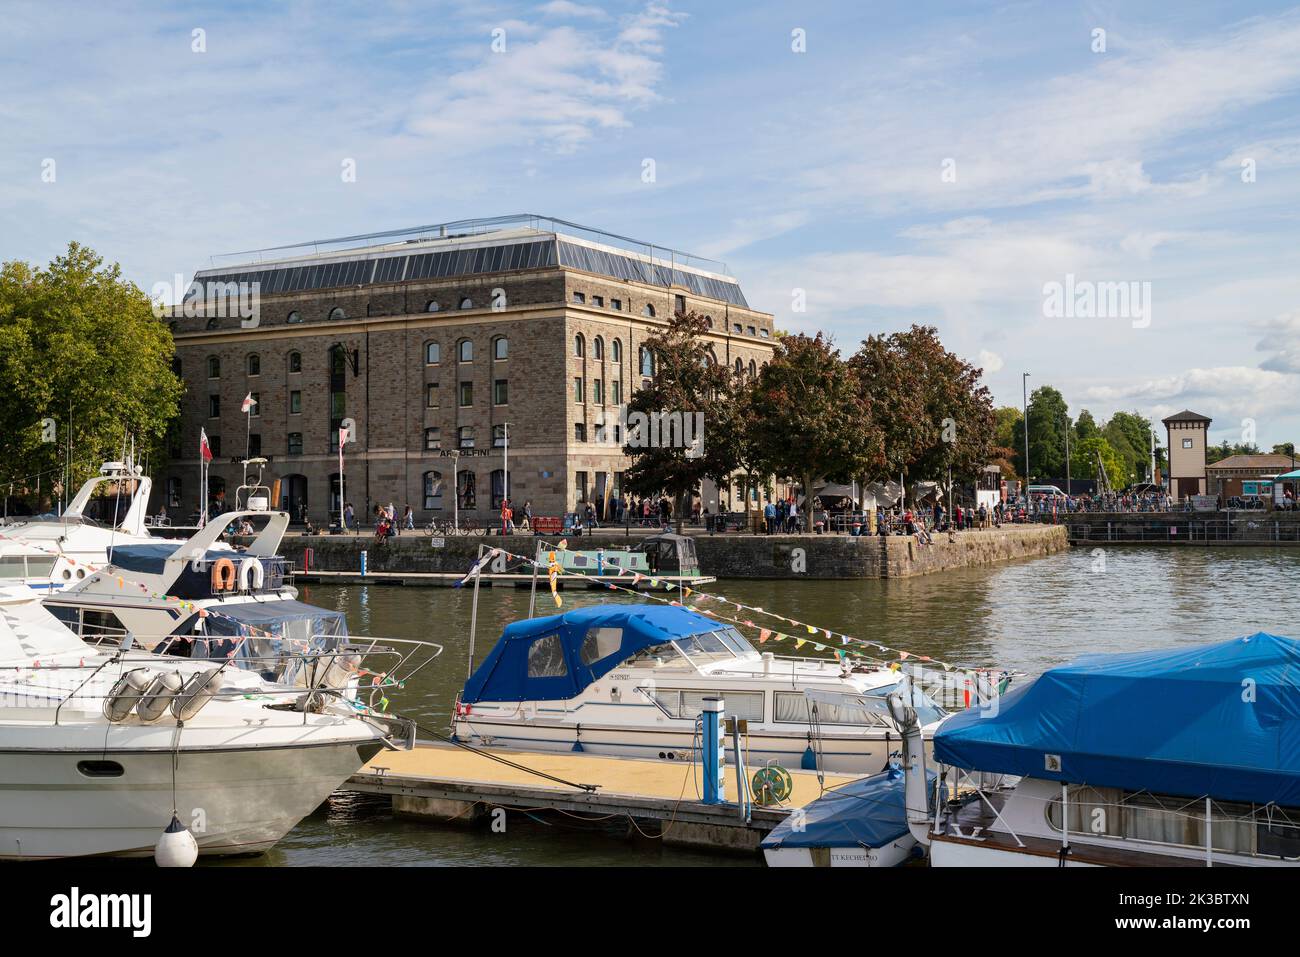 General view of the exterior of the Arnolfini, a modern art gallery in the floating harbour in Bristol, England, UK. Stock Photo